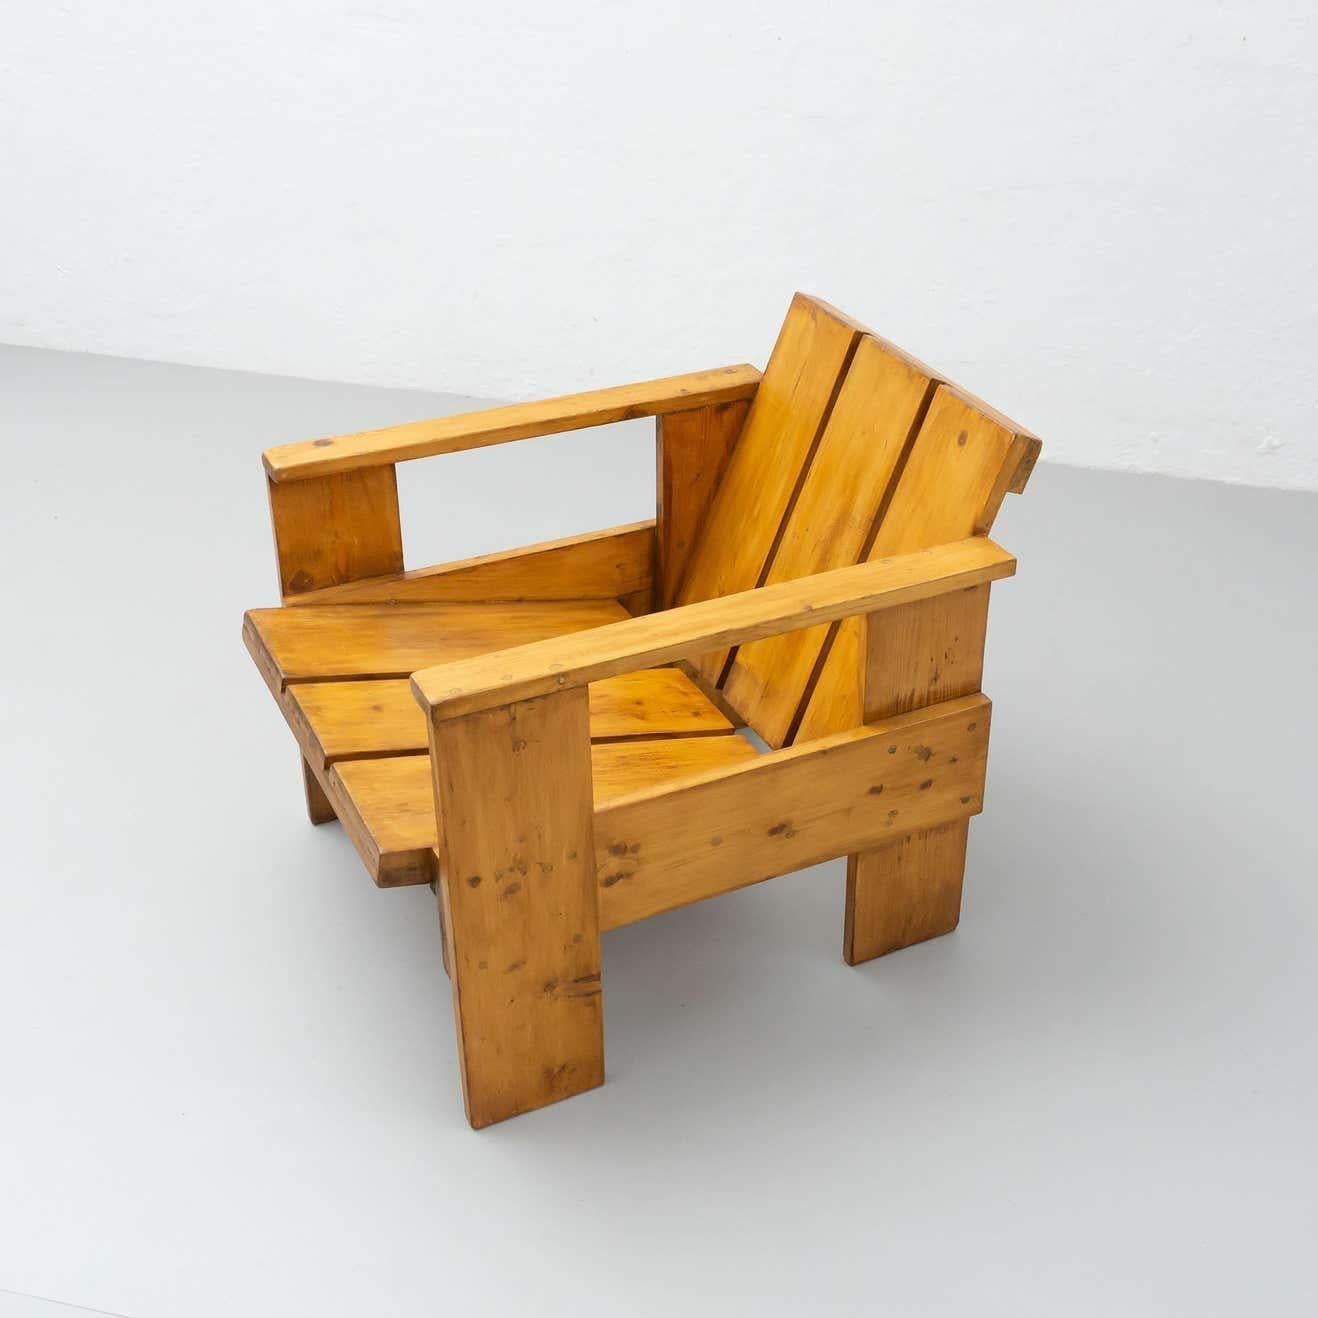 Gerrit Rietveld Mid-Century Modern Wood Crate Chair, circa 1950 For Sale 2